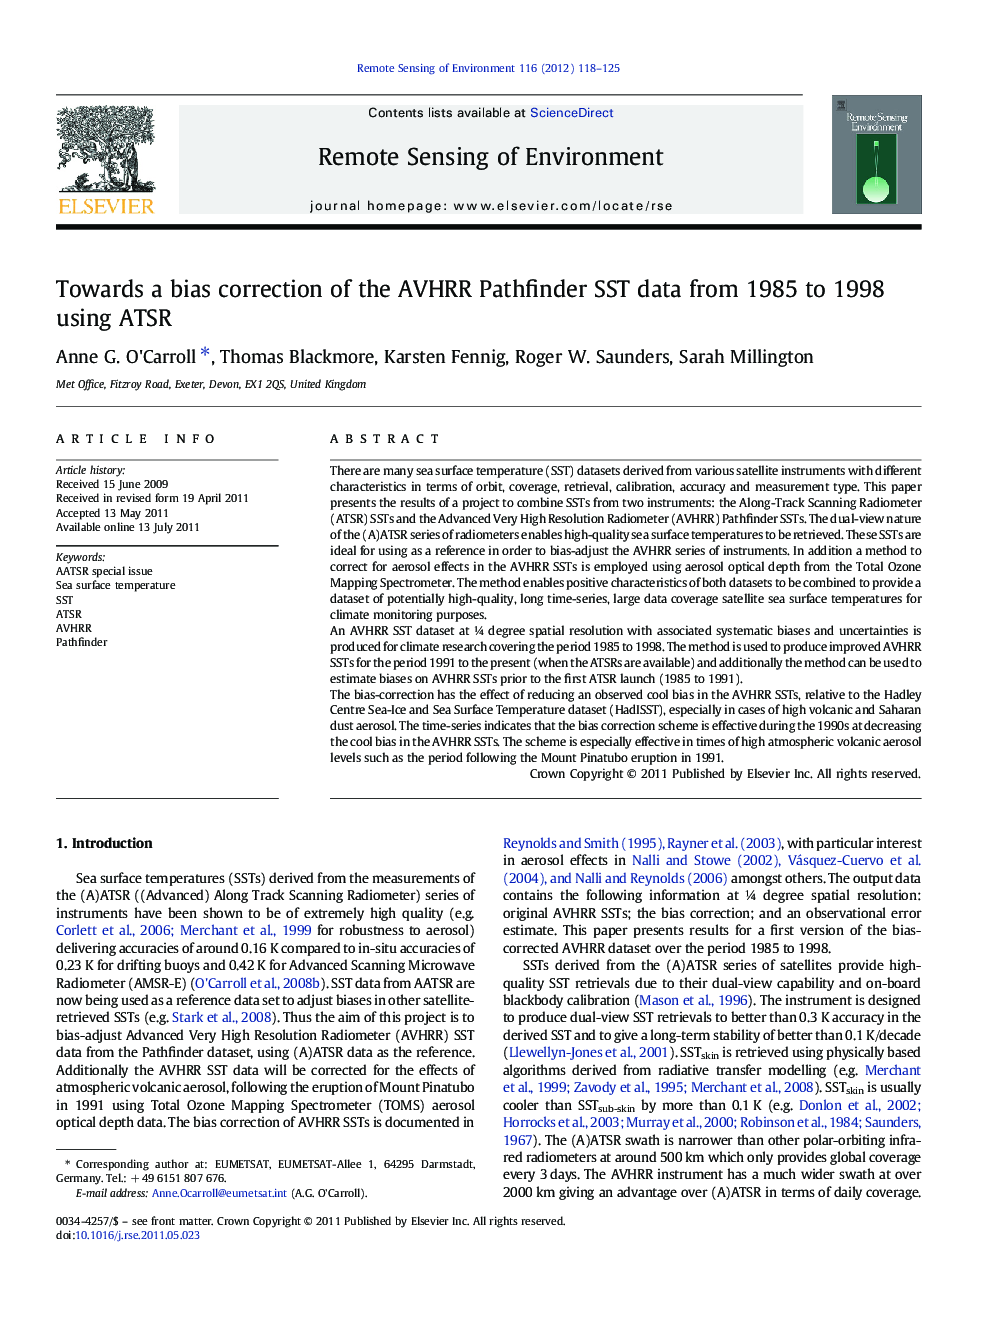 Towards a bias correction of the AVHRR Pathfinder SST data from 1985 to 1998 using ATSR